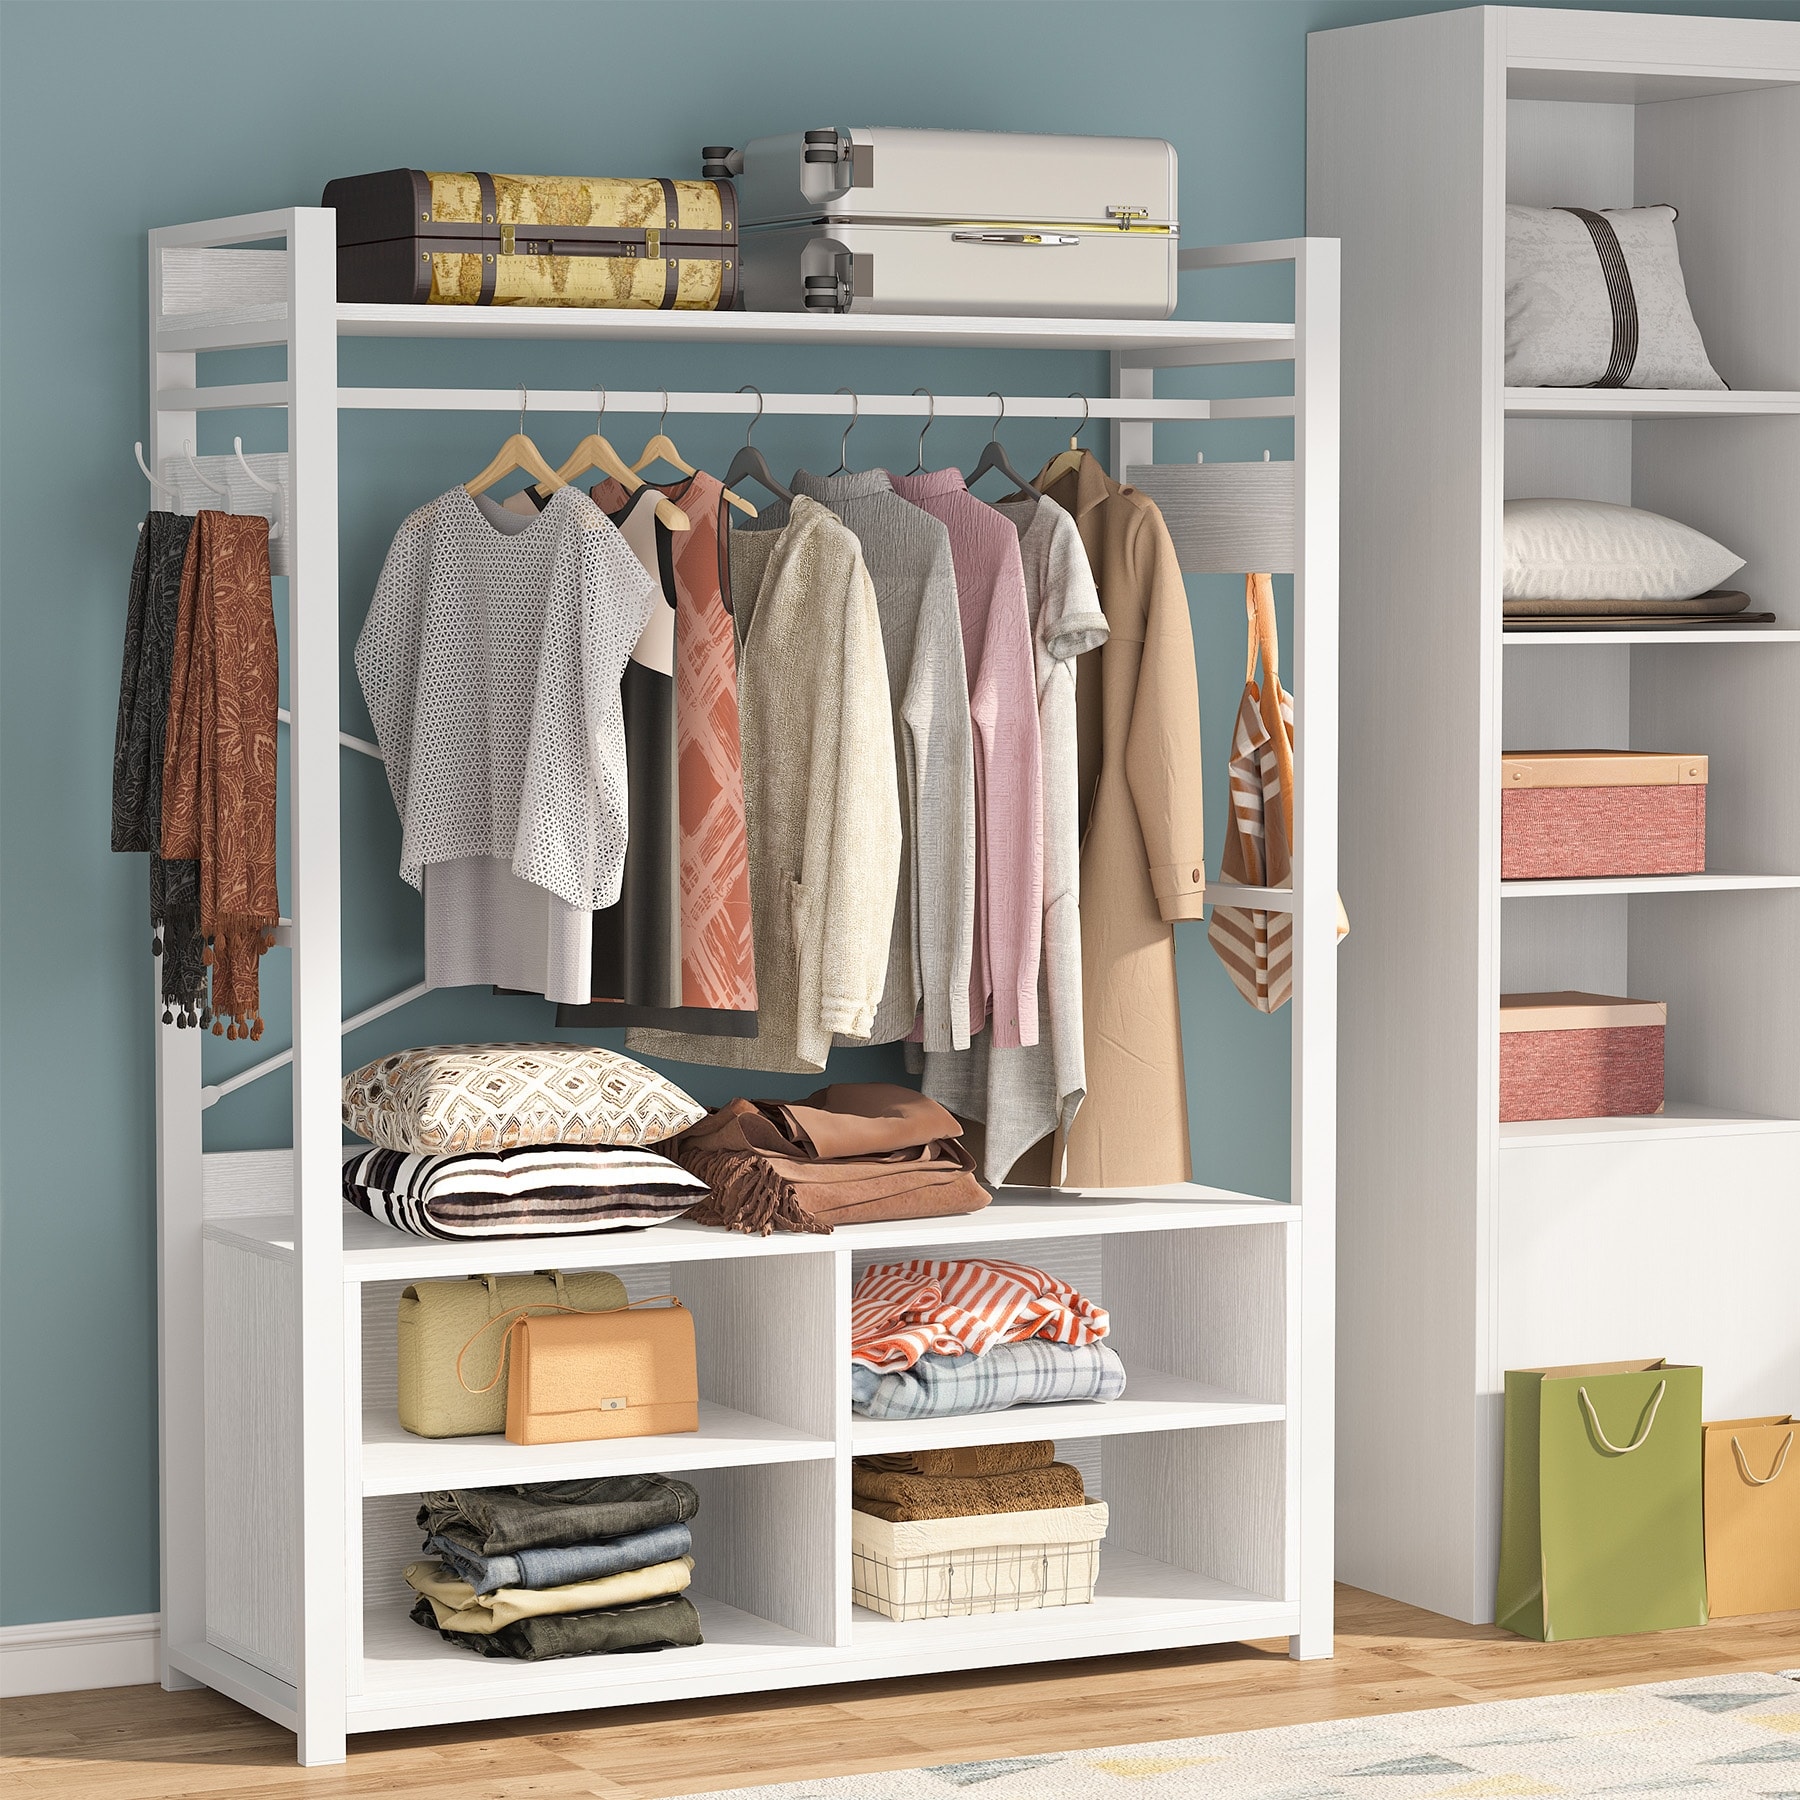 https://ak1.ostkcdn.com/images/products/is/images/direct/d3723b55f747ec6f7bee84e72f1986fc7803619a/Free-standing-Closet-Clothing-Rack%2C-Metal-Closet-Organizer-System-with-Shelves.jpg